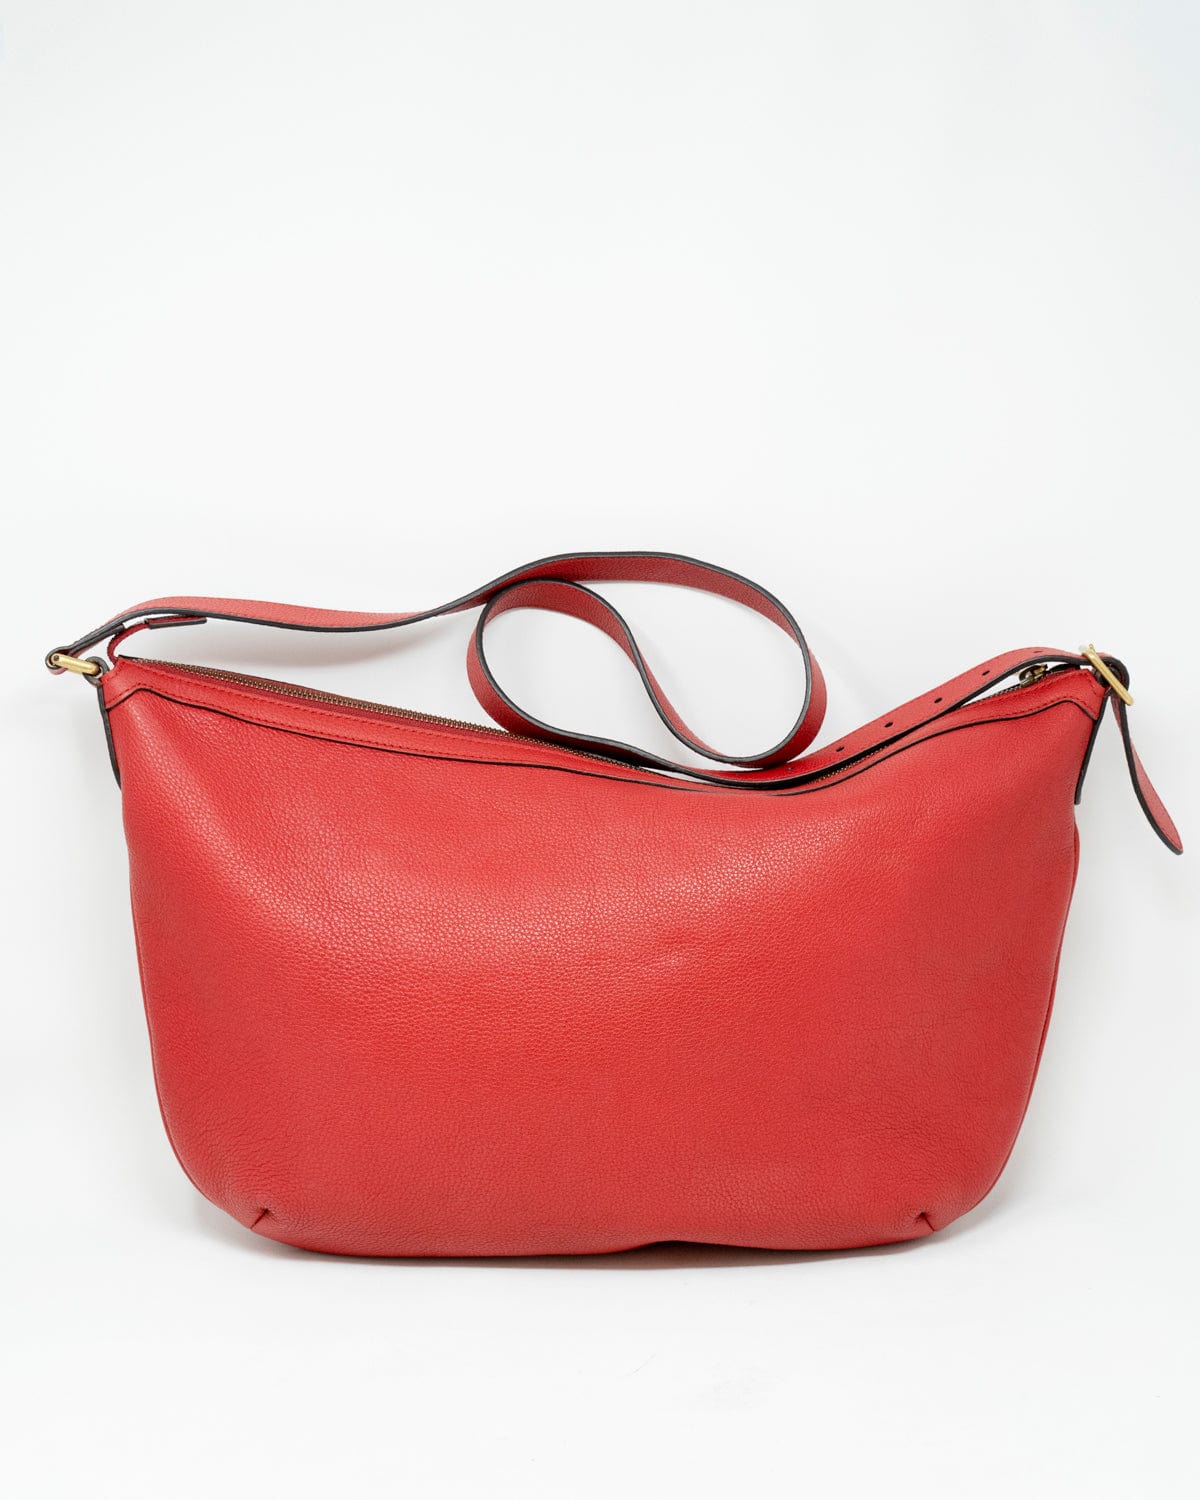 Gucci Gucci red slouchy logo messenger style bag - AWL3221